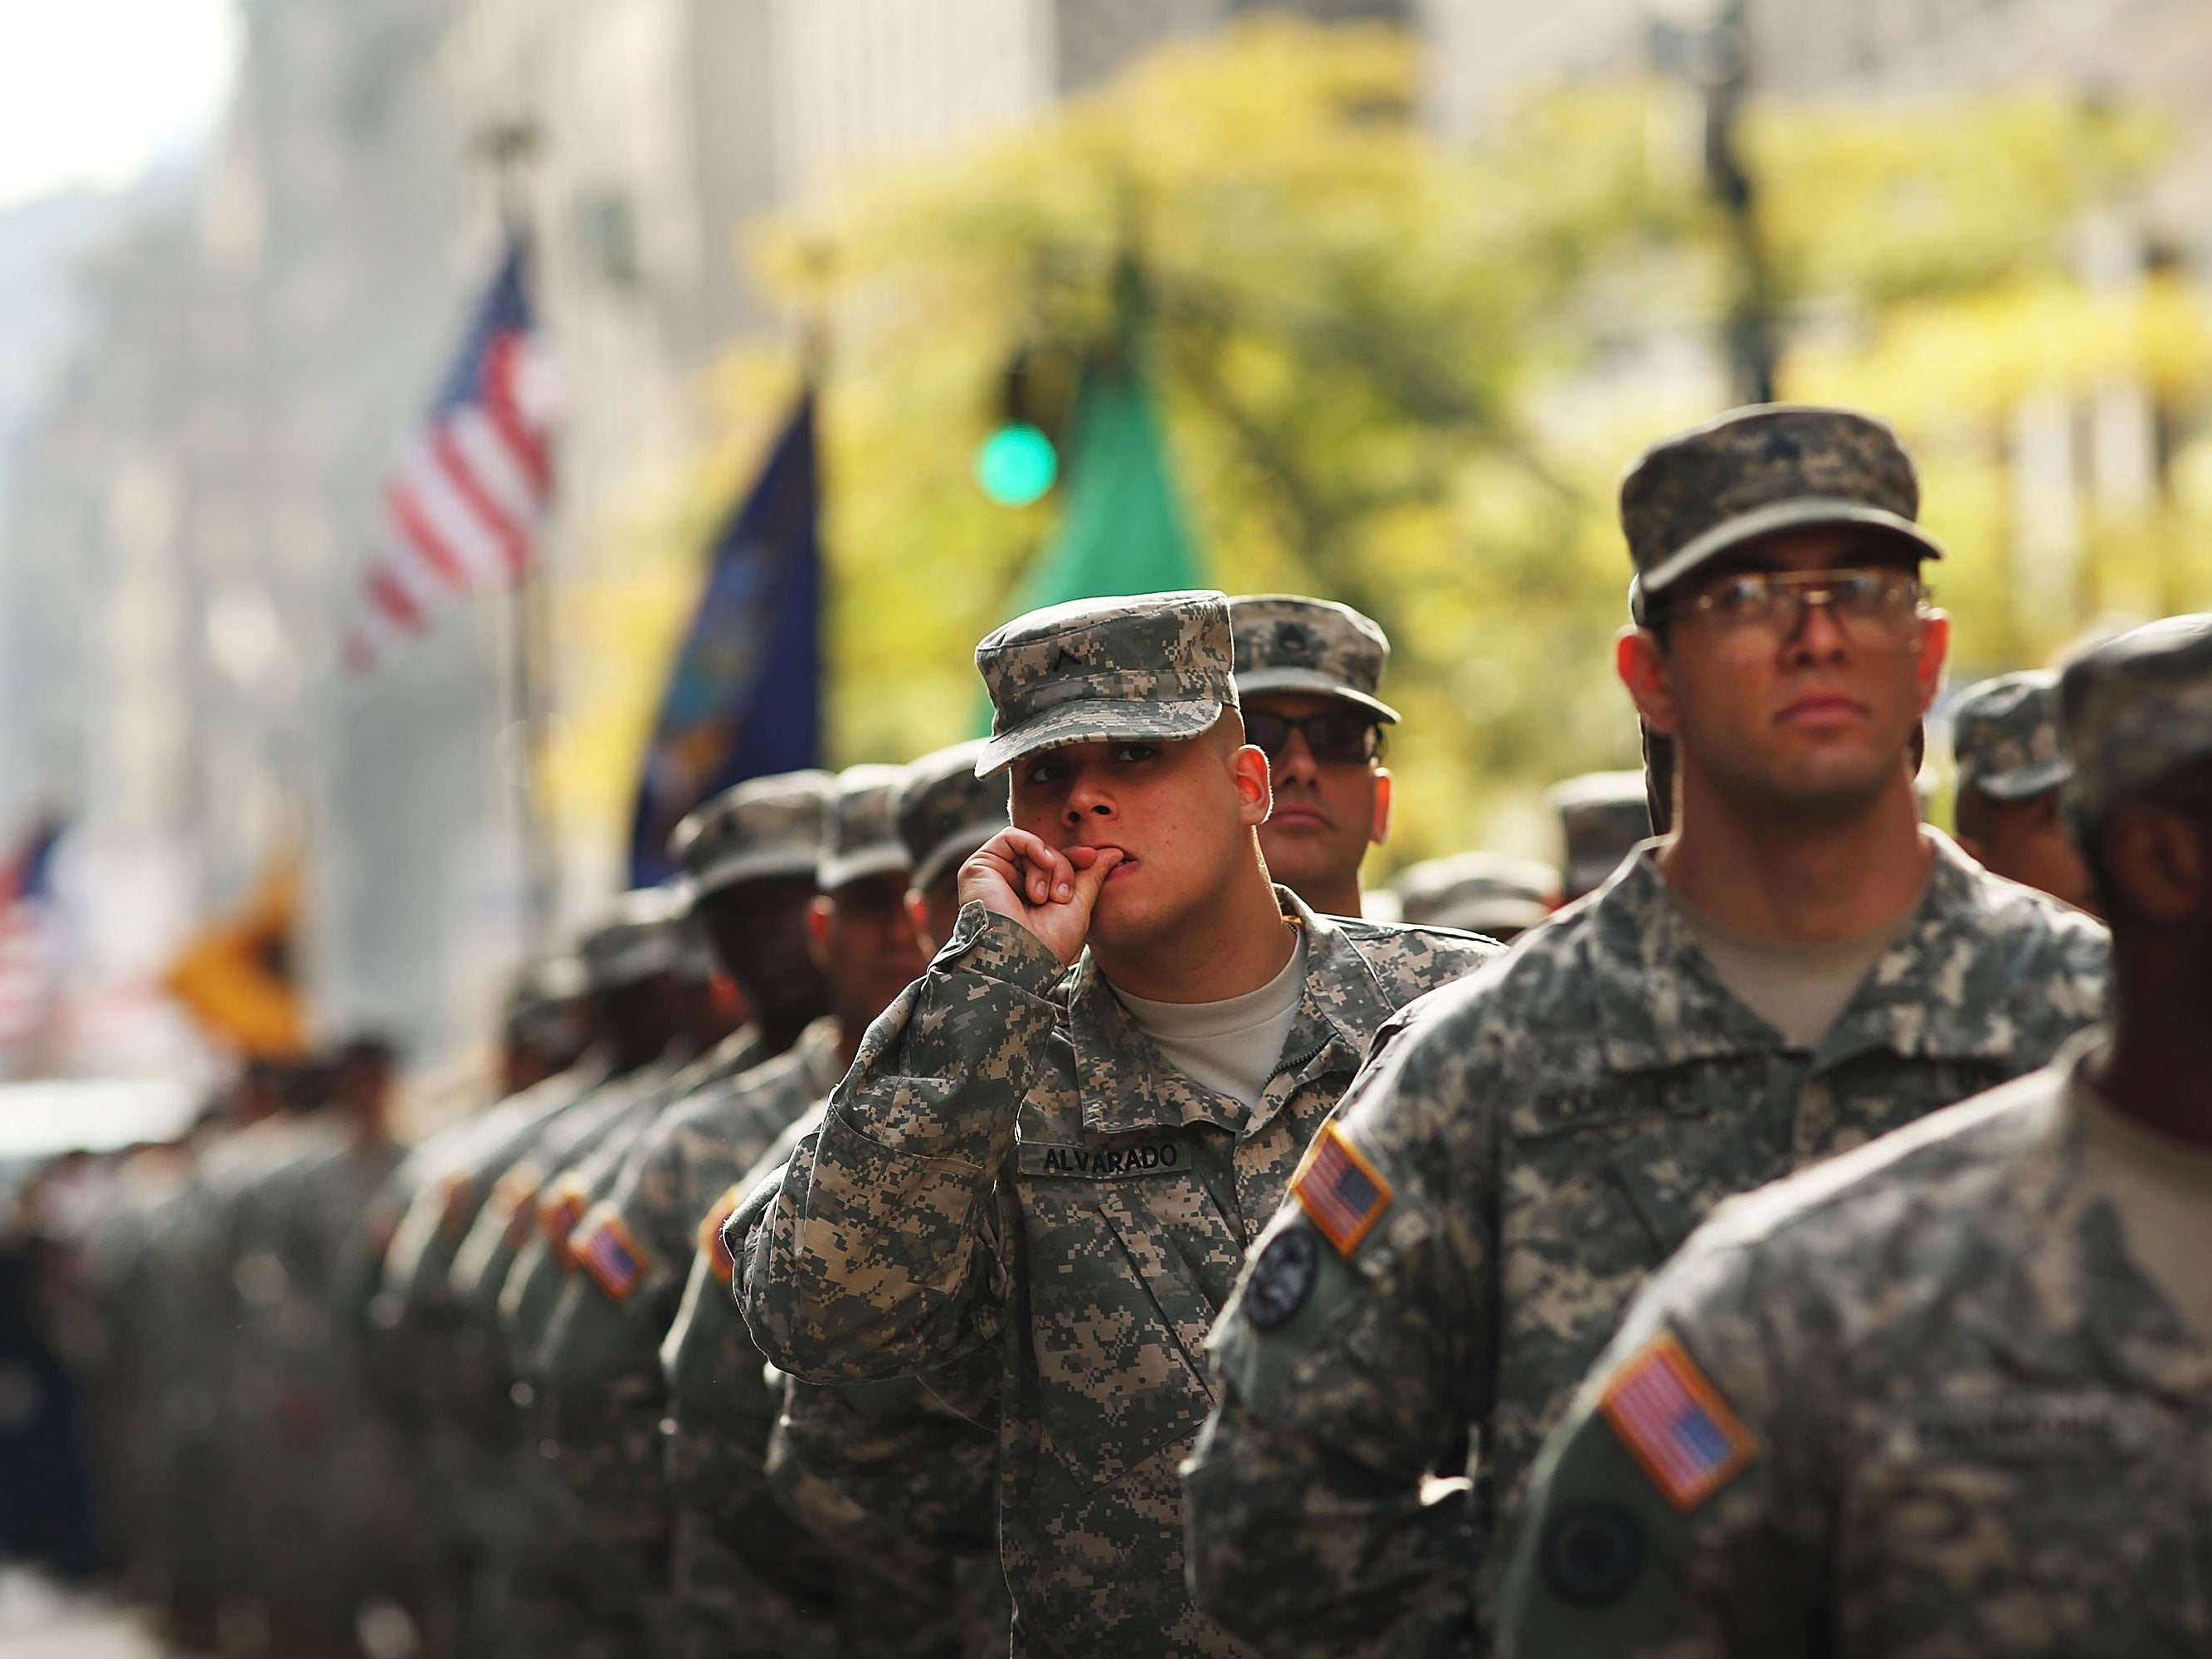 The Pentagon is now in a position to change its equal opportunity policy